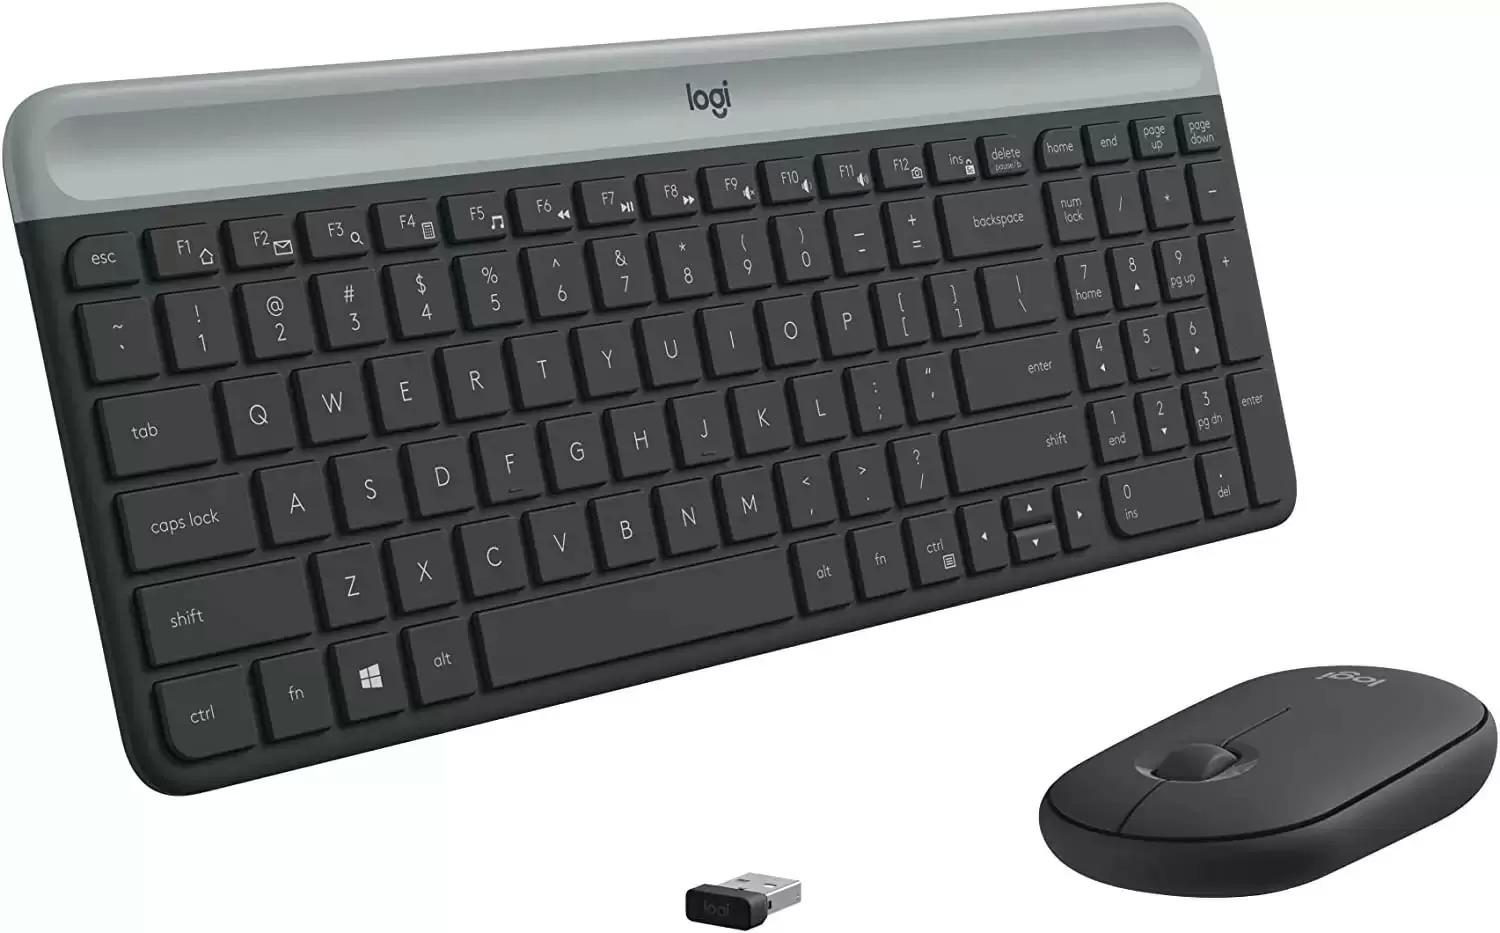 Logitech MK470 Slim Wireless Keyboard and Mouse Graphite Combo for $15.99 Shipped